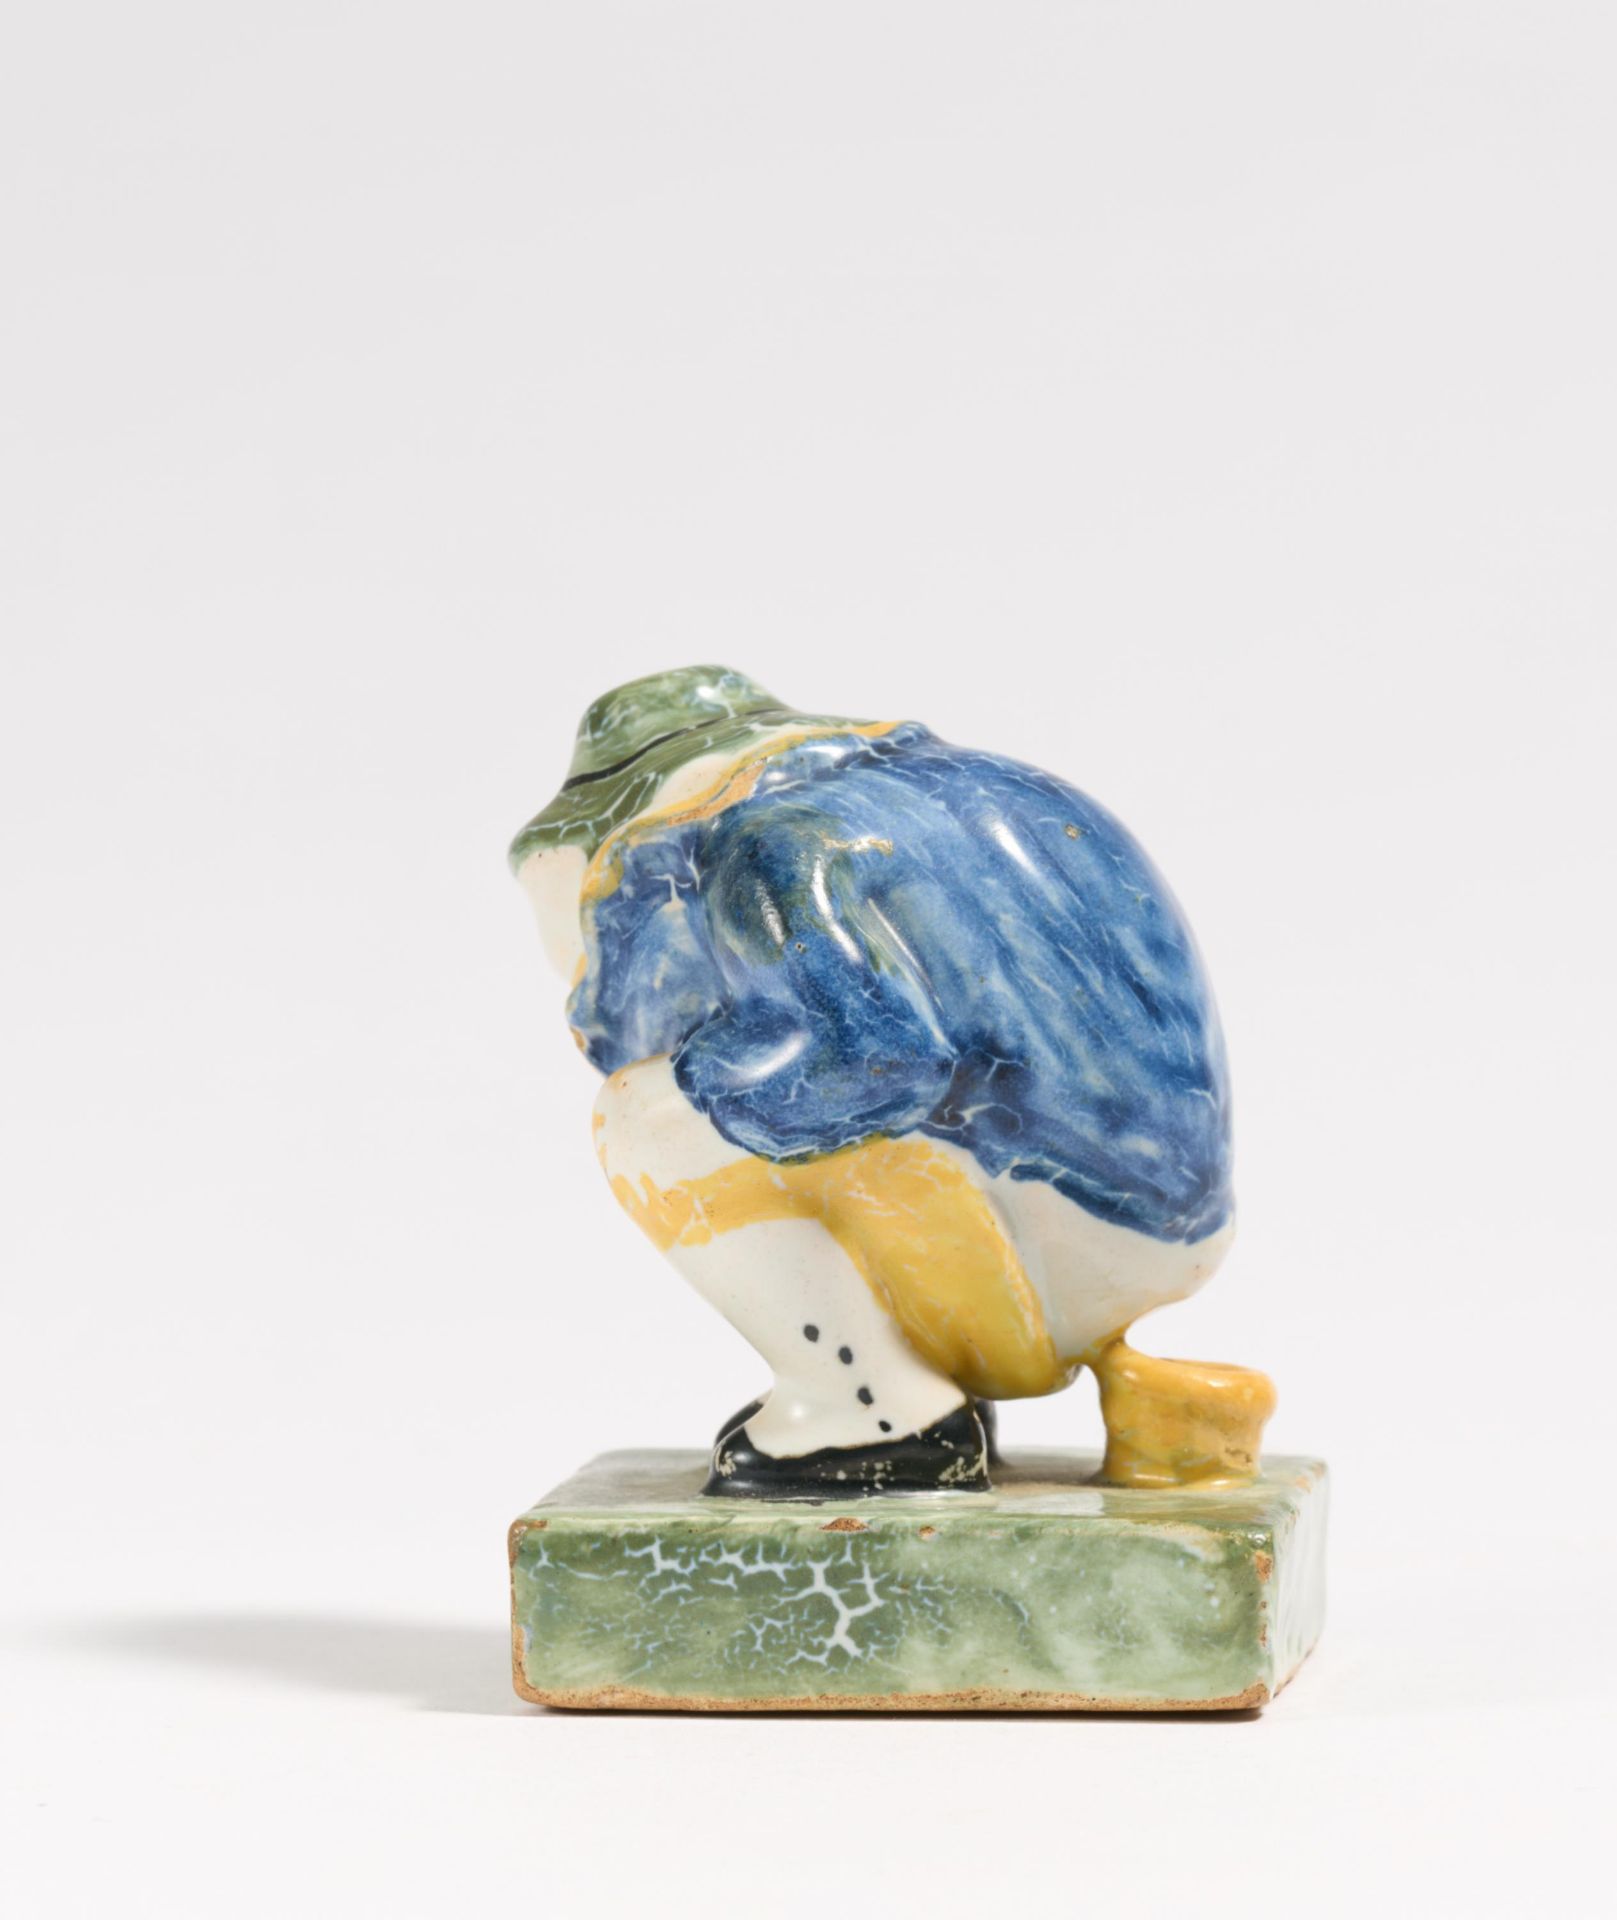 Small figurine of squatting man on chamber pot - Image 3 of 4